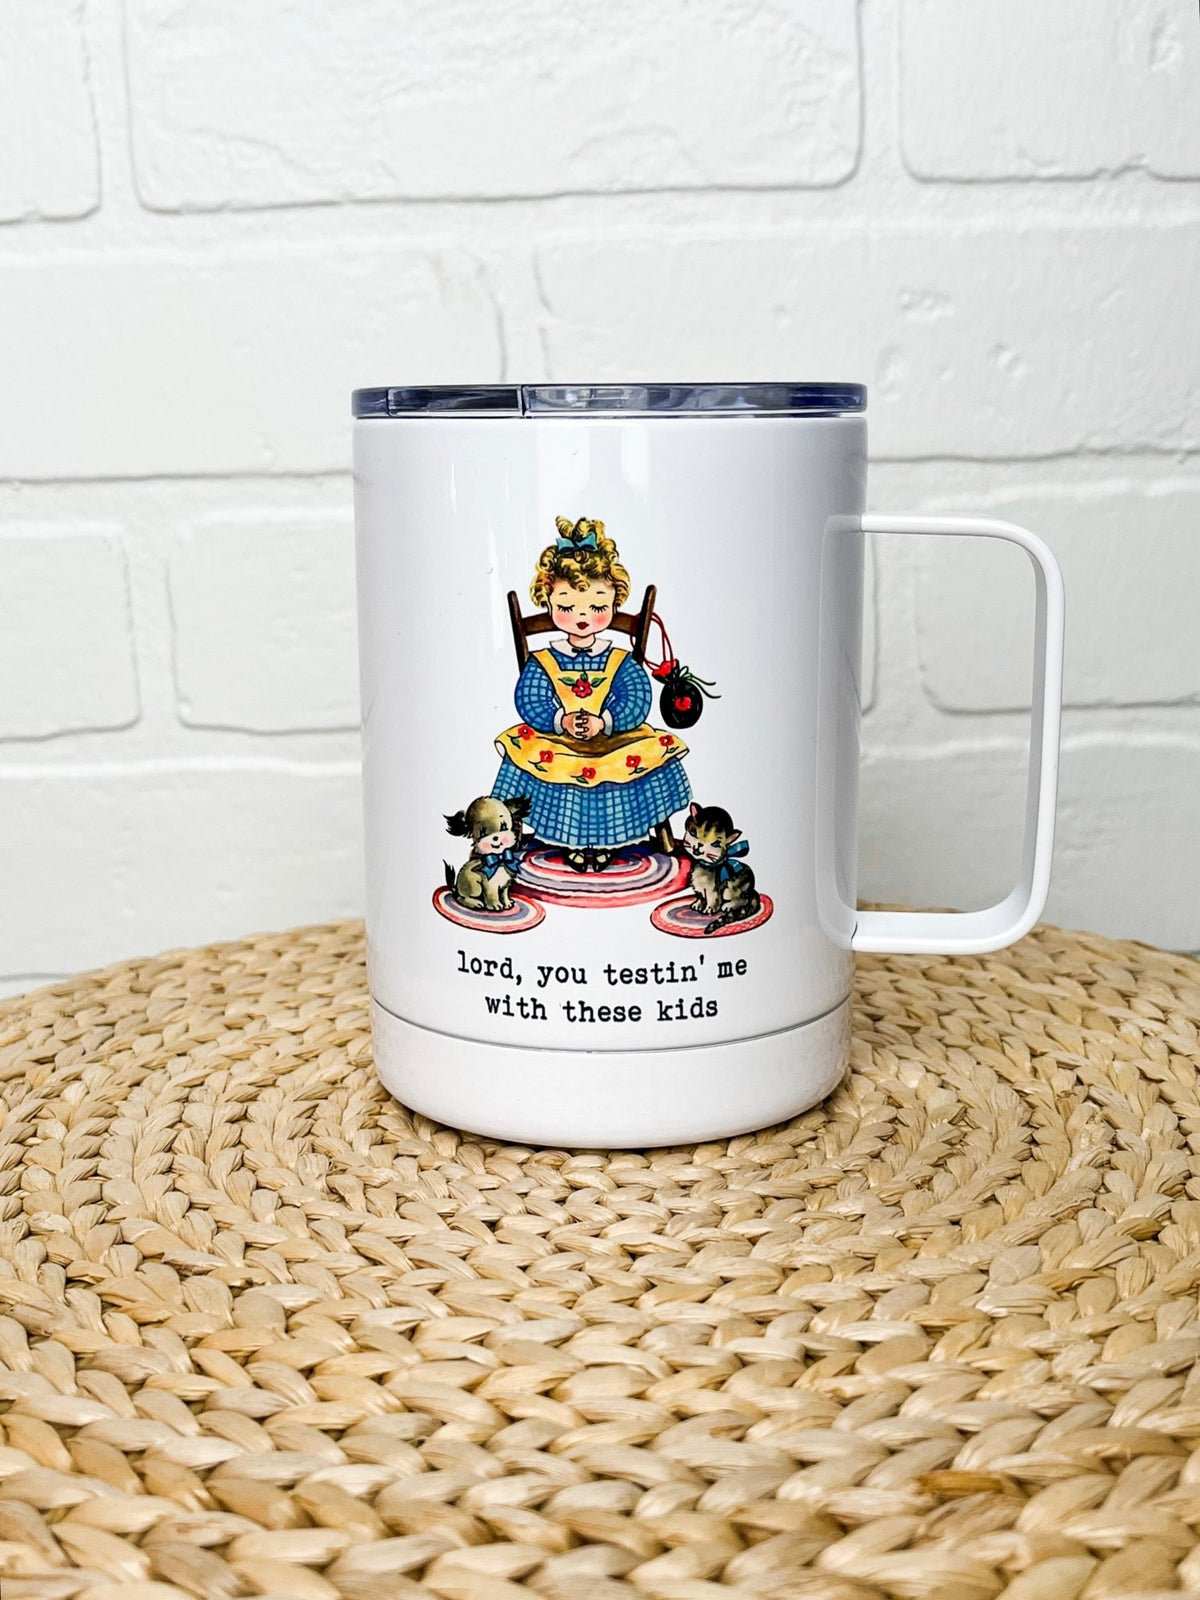 Mugsby Lord, you testin' me travel cup - Stylish travel cup - Trendy Gifts for Mom at Lush Fashion Lounge in Oklahoma